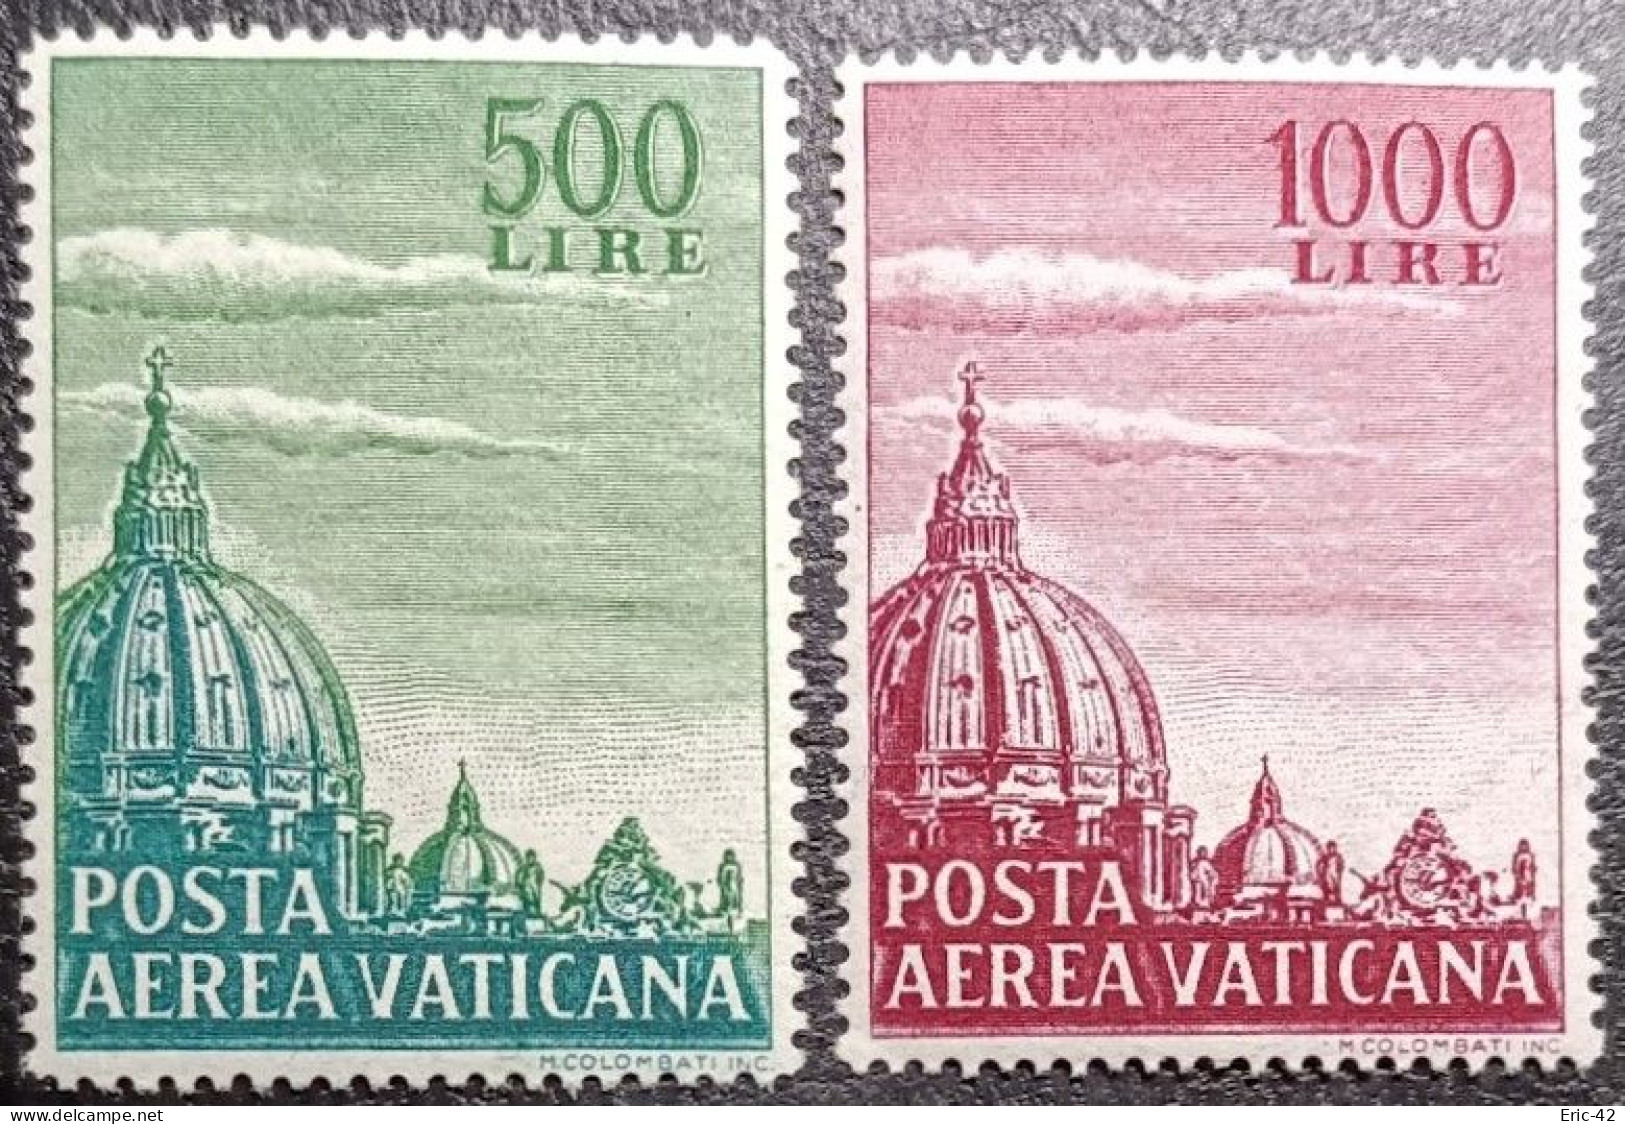 VATICAN. PA Y&T N°33/34* (issu D'une Collection). Neuf* - Poste Aérienne